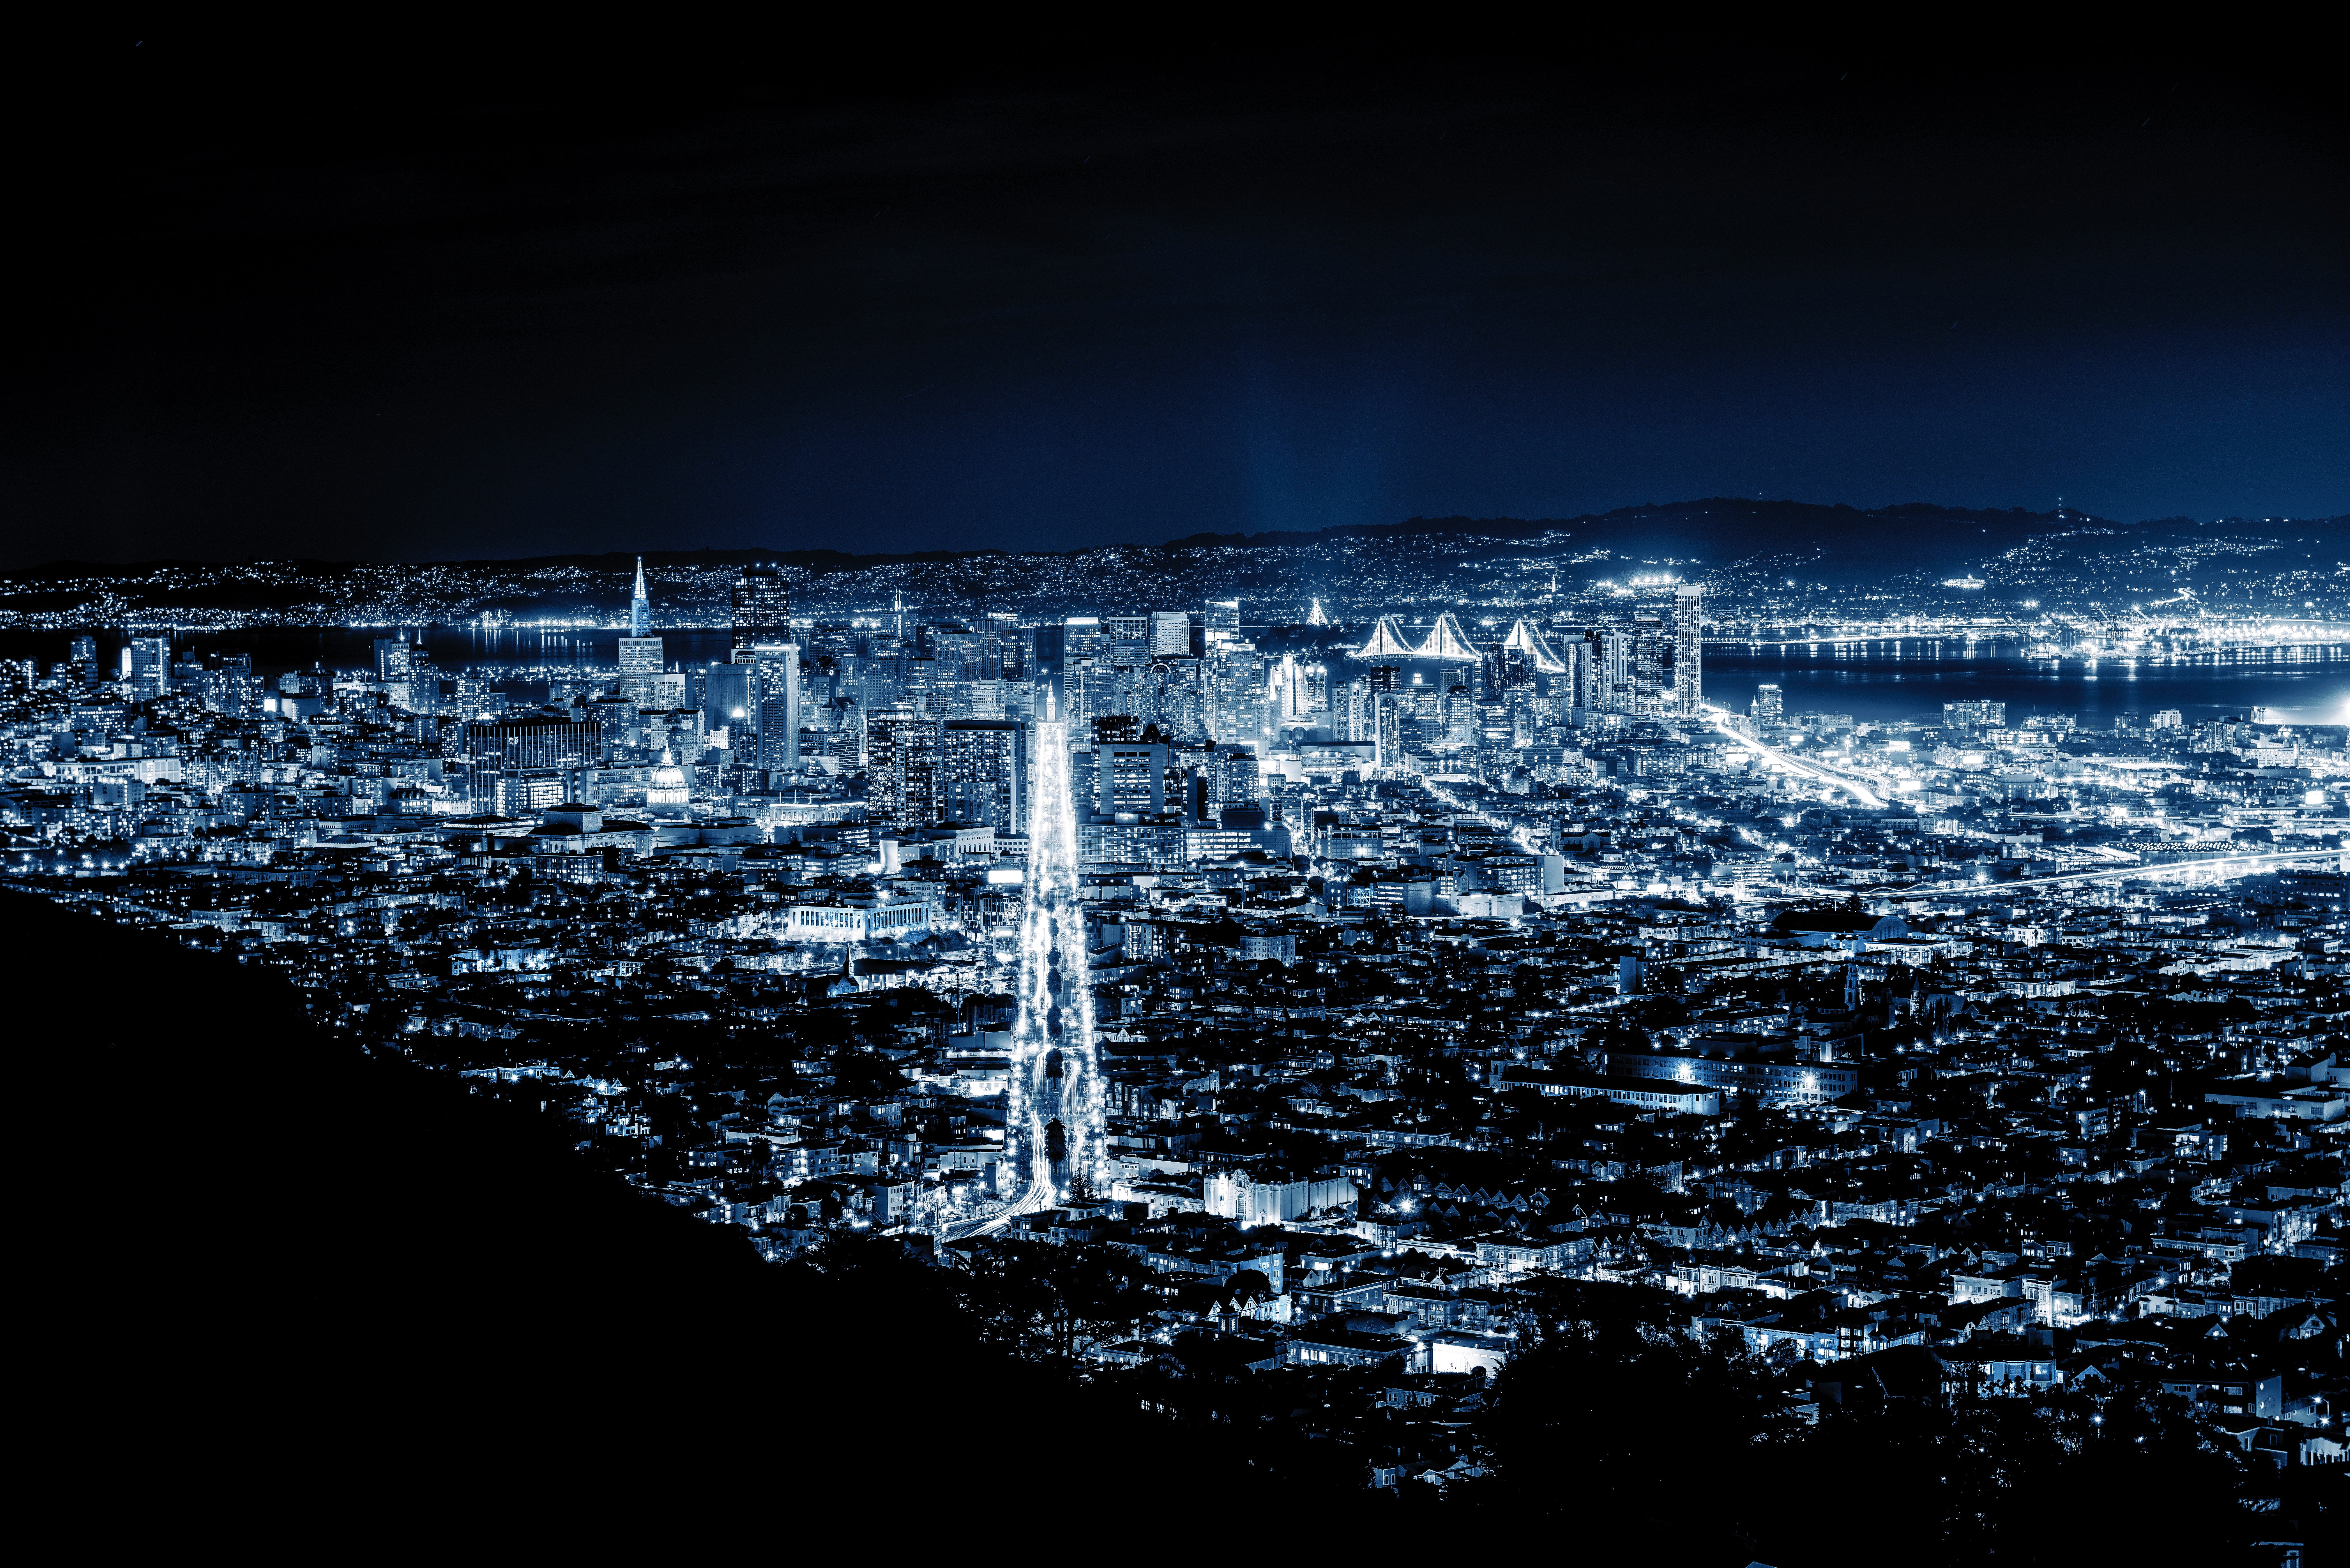 aerial photography of city, cityscape, San Francisco, lights, night